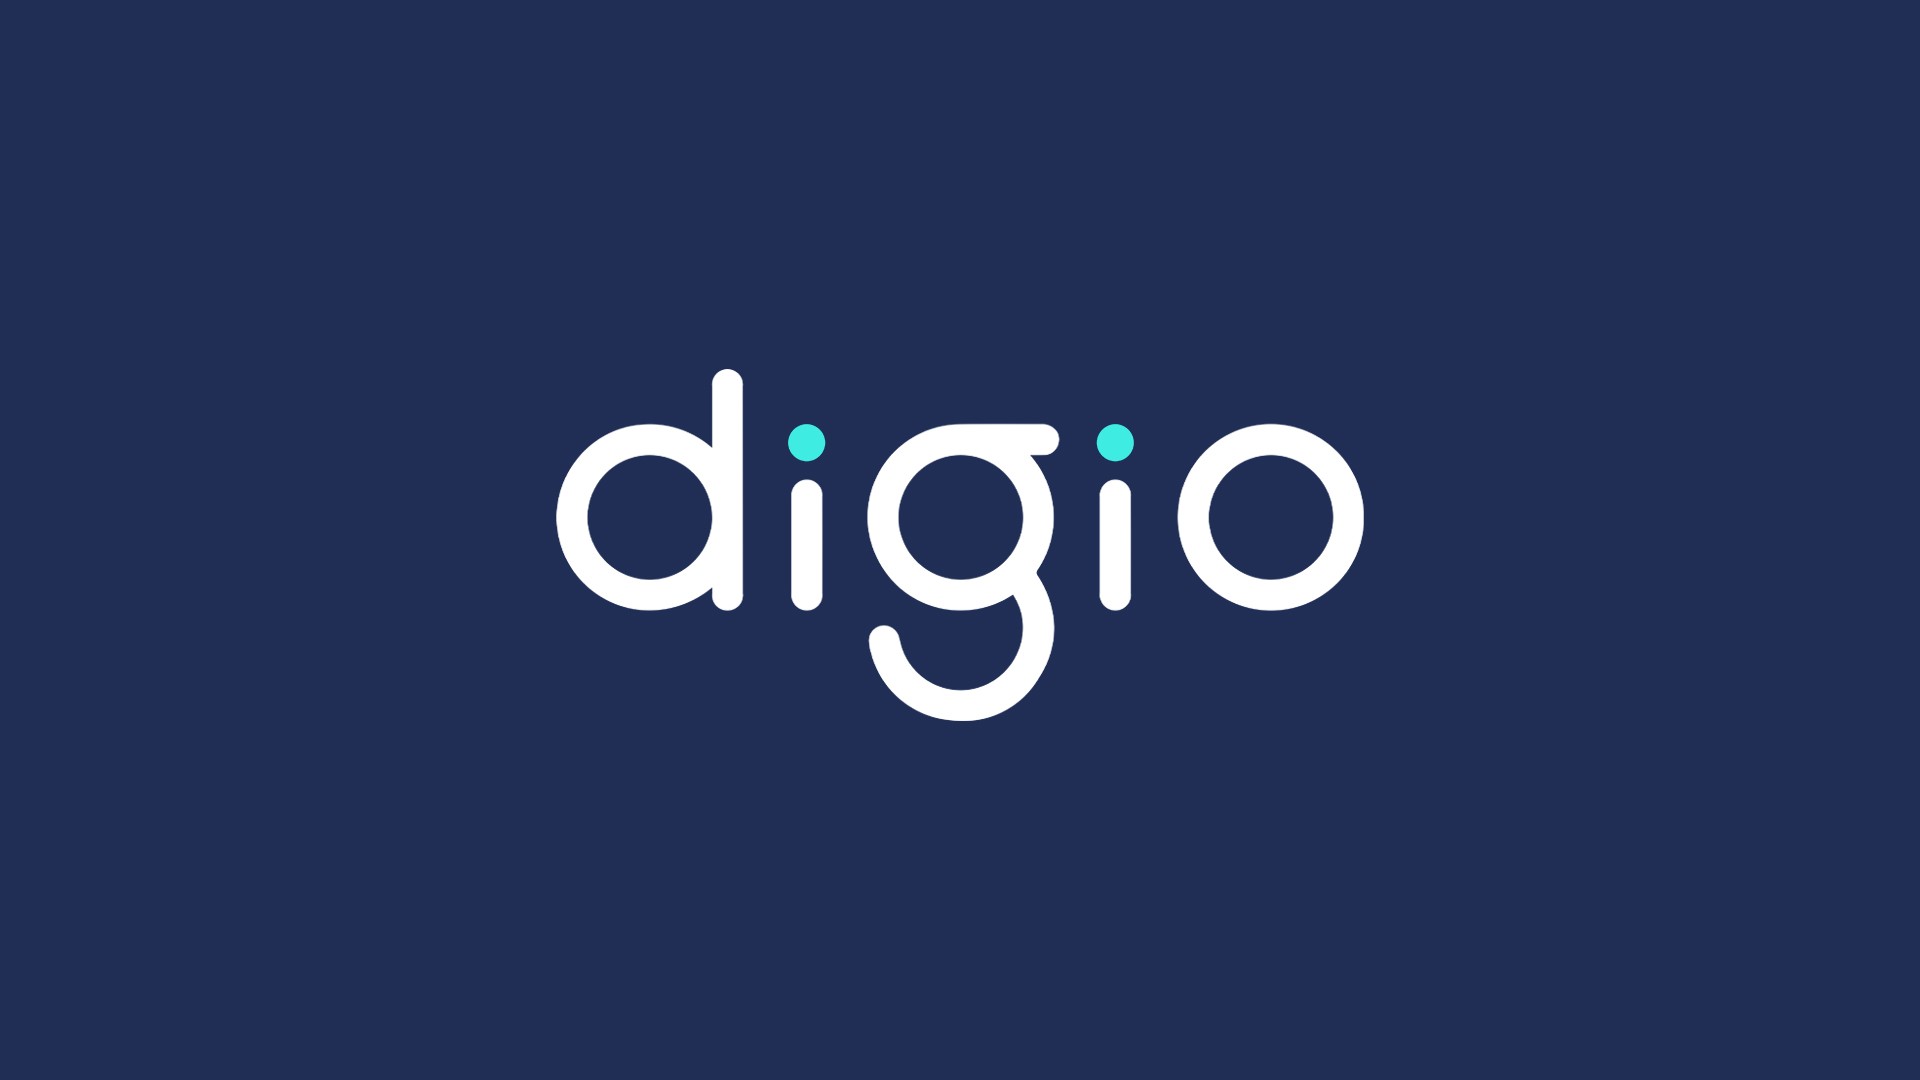 Digio expands 'Descontinho' platform offering up to 90% off purchases
